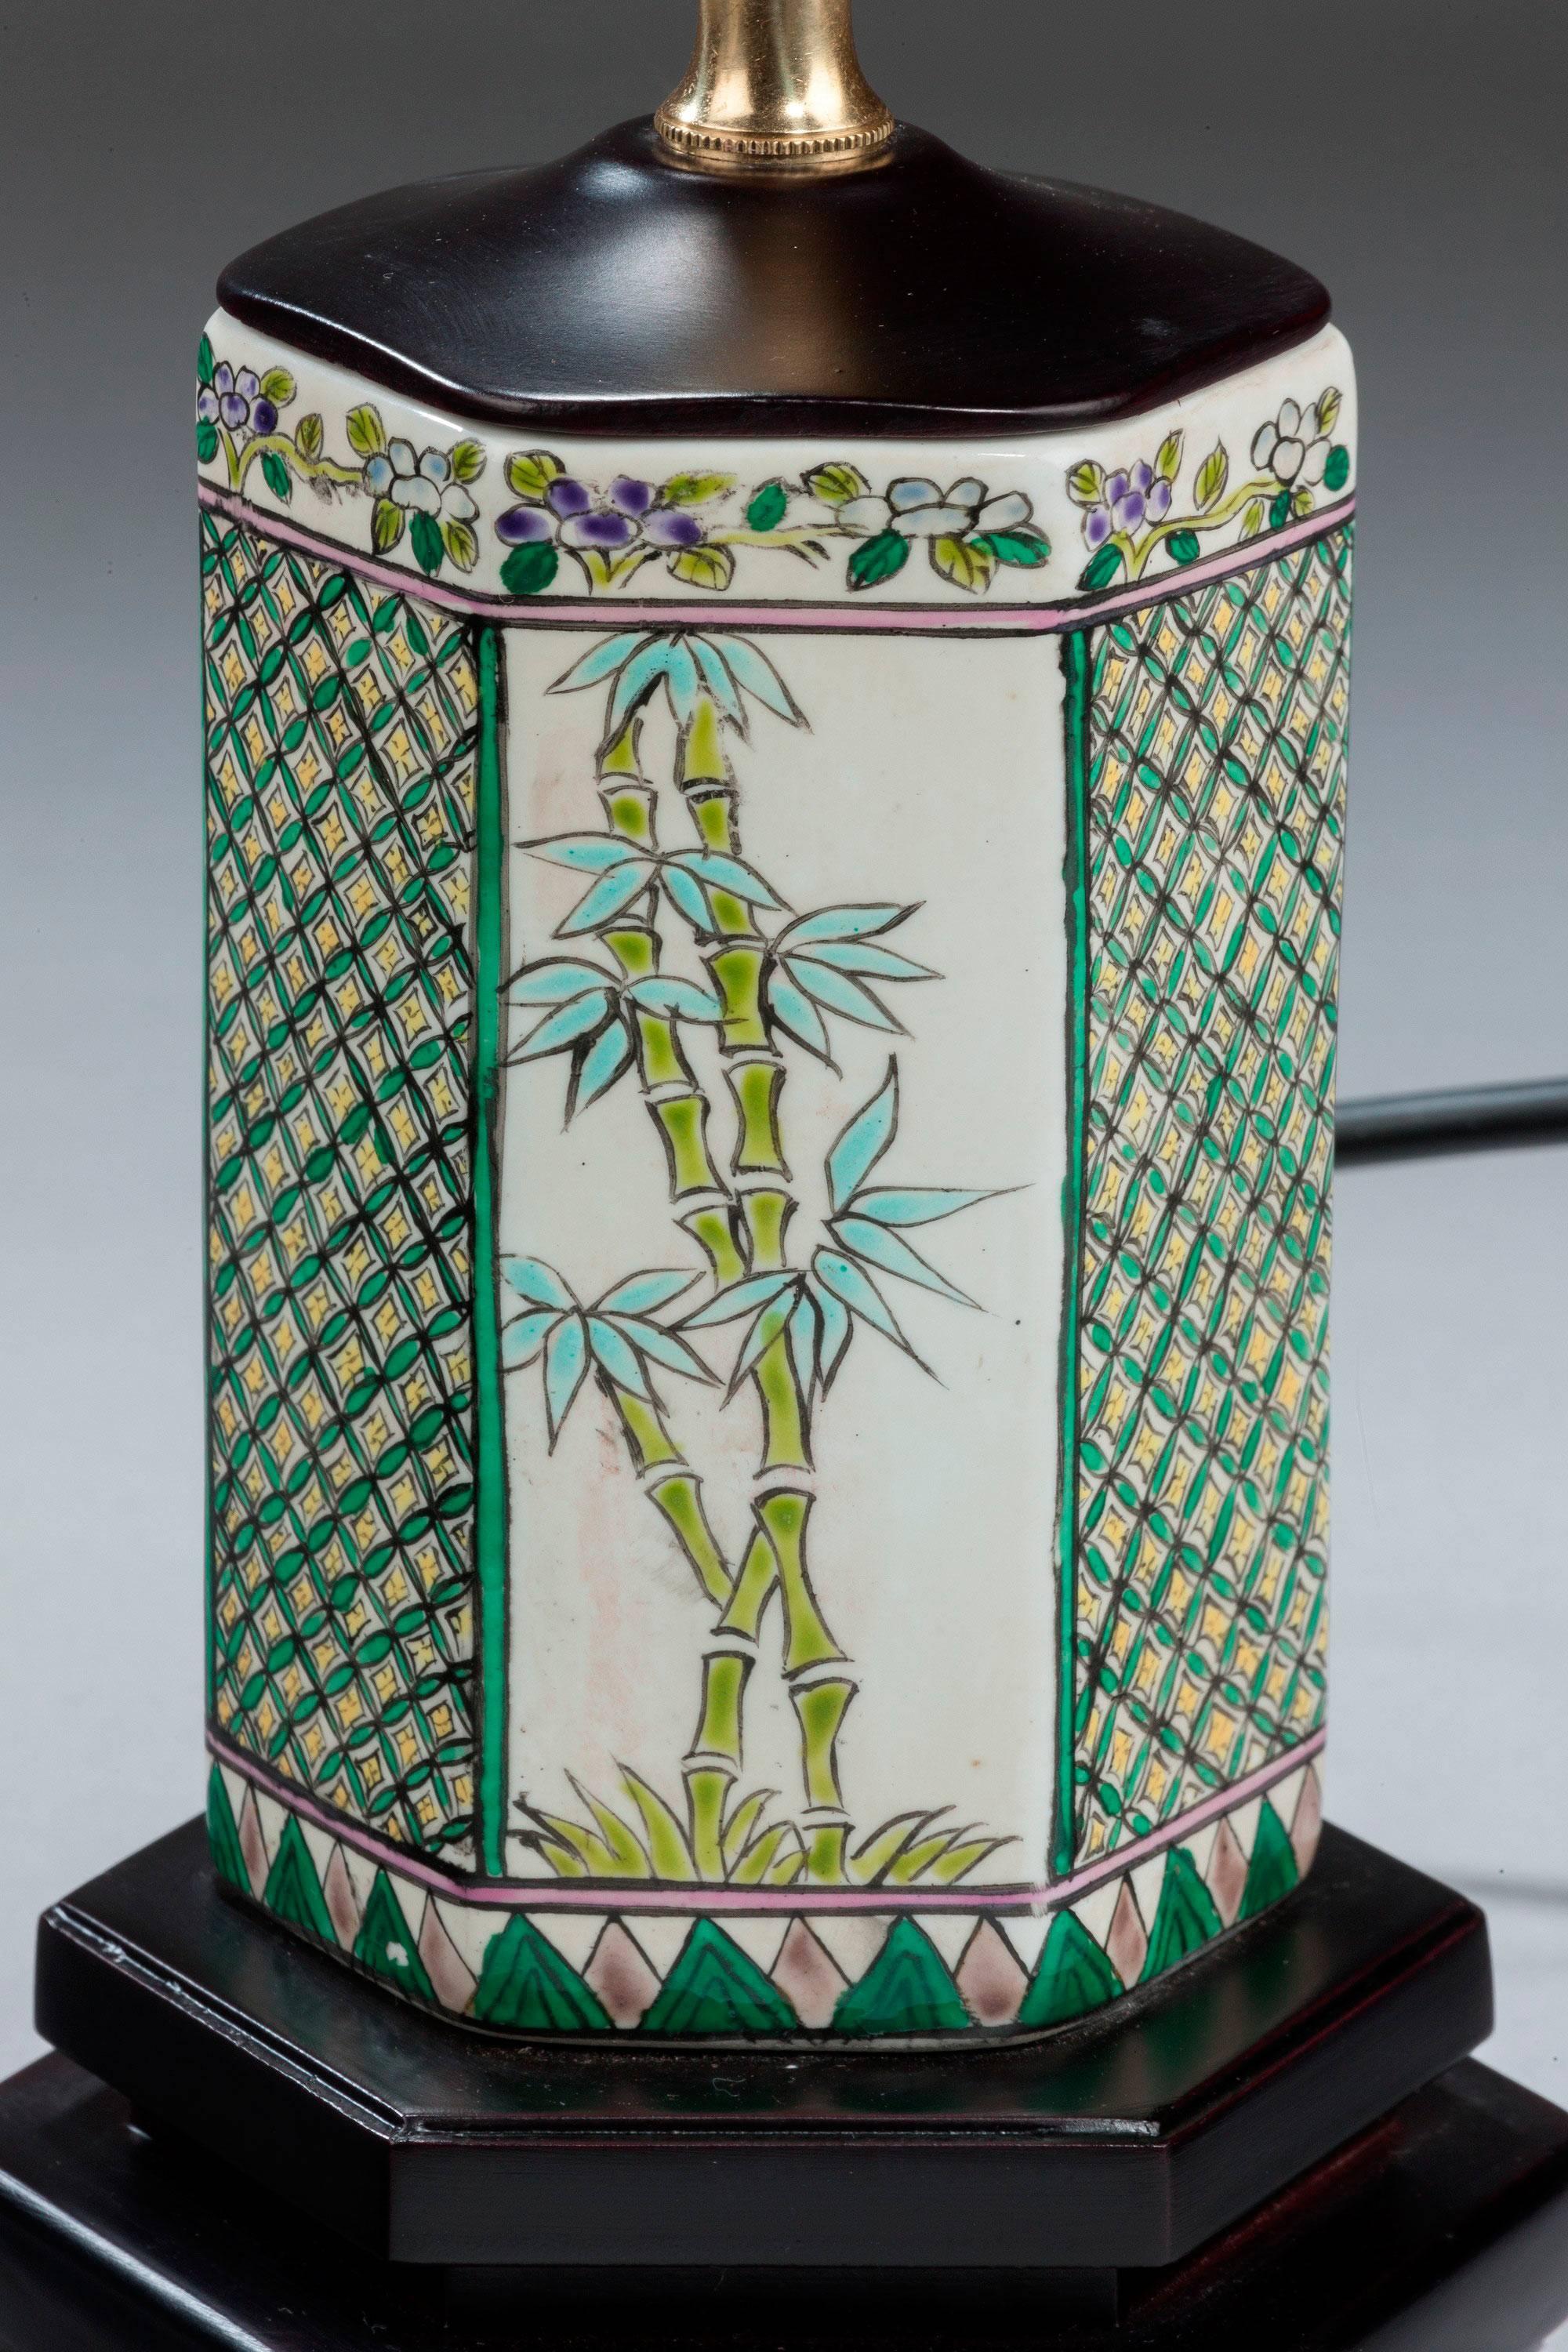 Pair of small Canton design porcelain hexagonal lamps with bamboo and trellis decoration. Modern.

Canton porcelains are Chinese ceramic wares made for export in the 18th-20th century. The wares were made, glazed and fired at Jingdezhen but